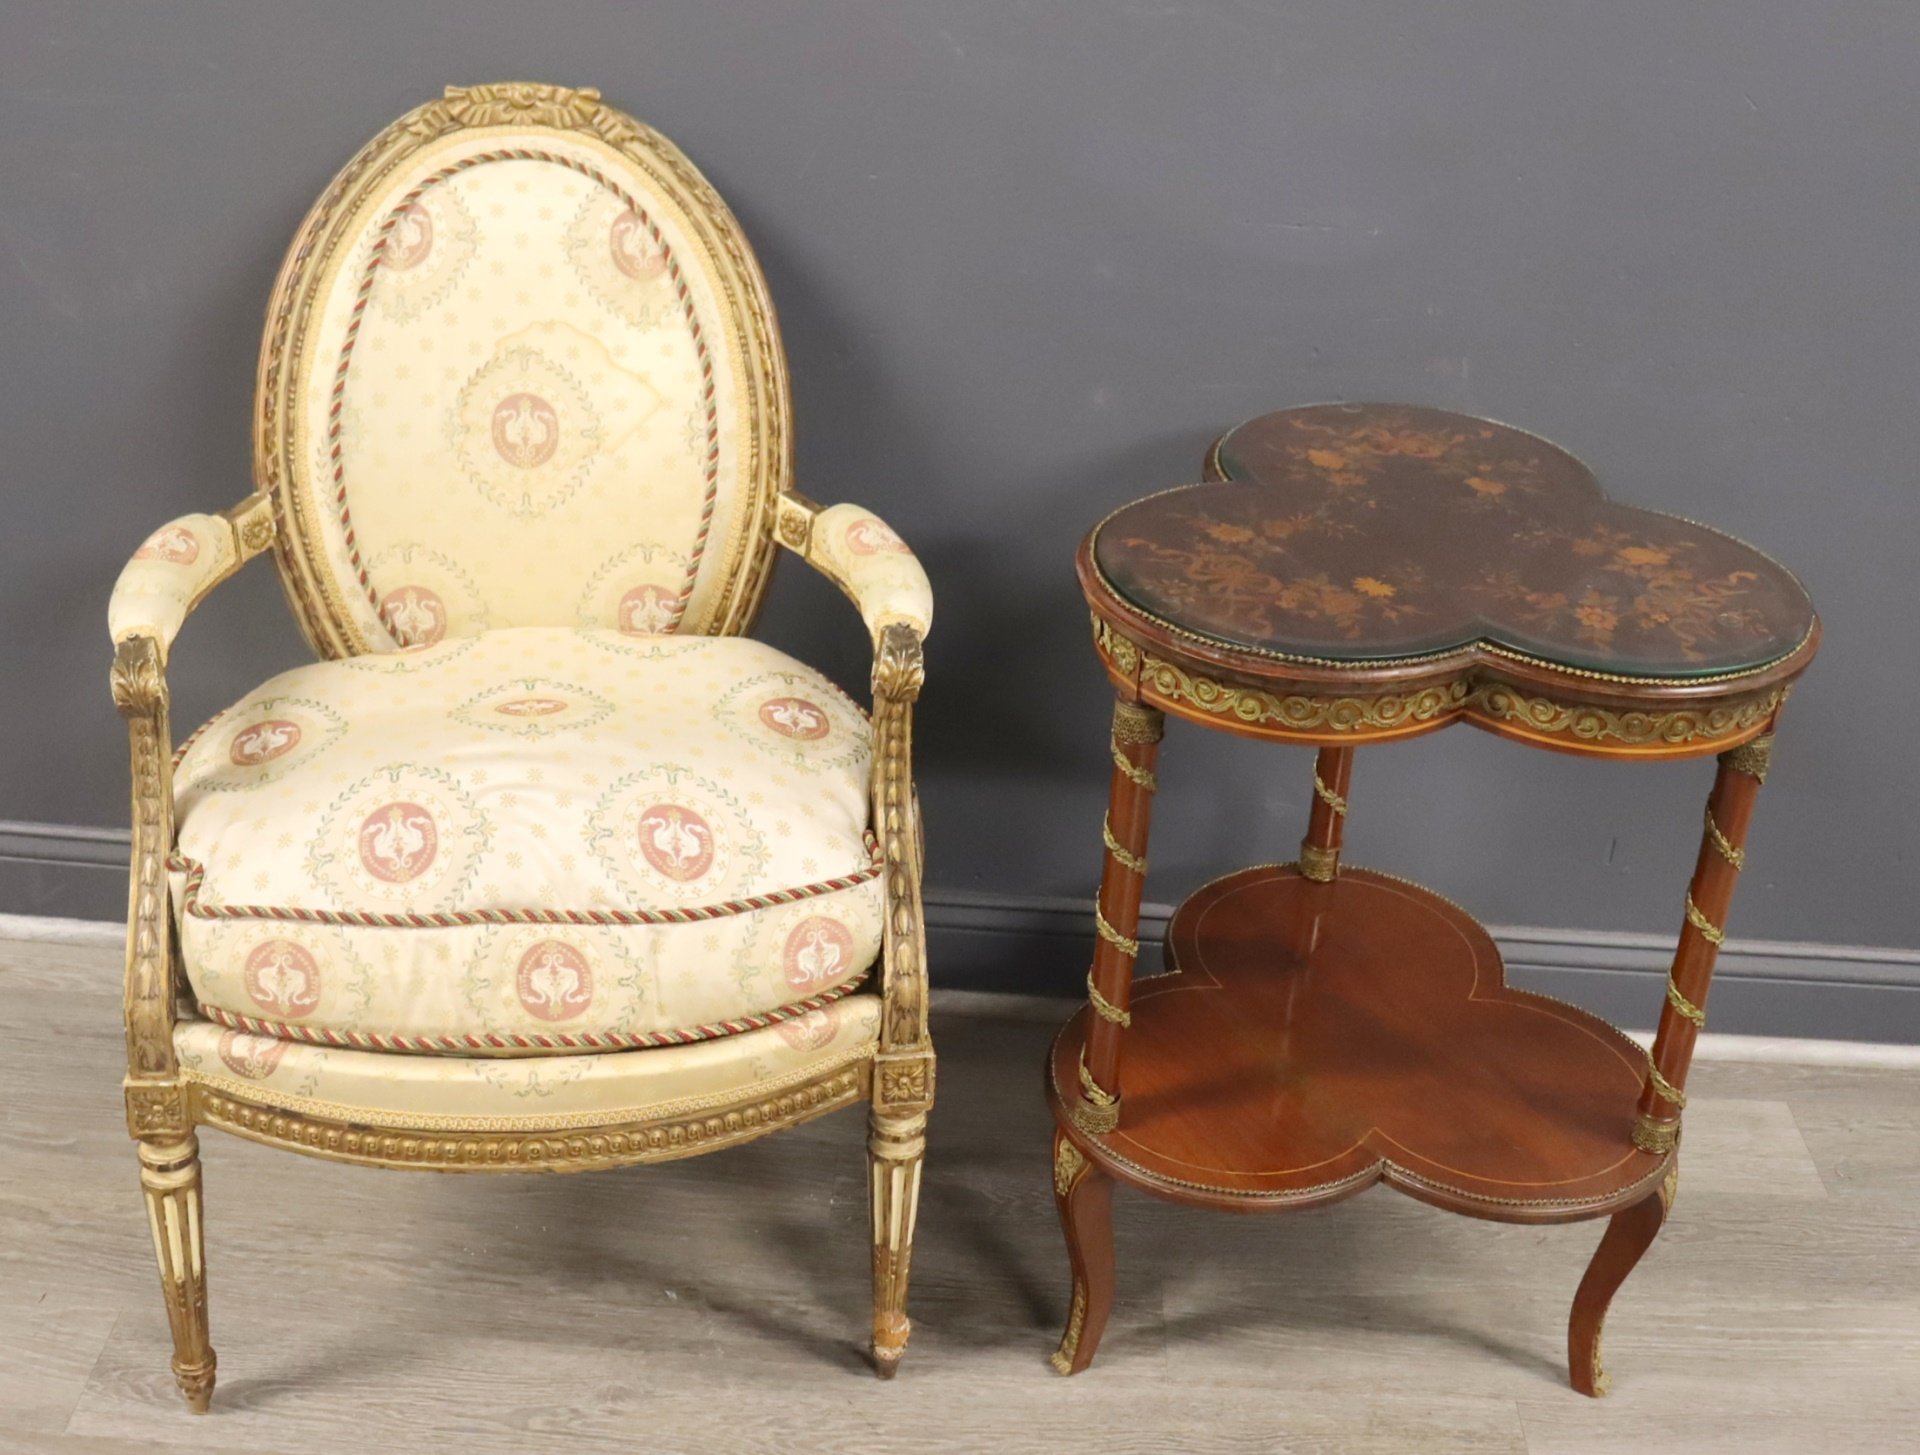 LOUIS XV1 STYLE CHAIR TOGETHER 30b8a6